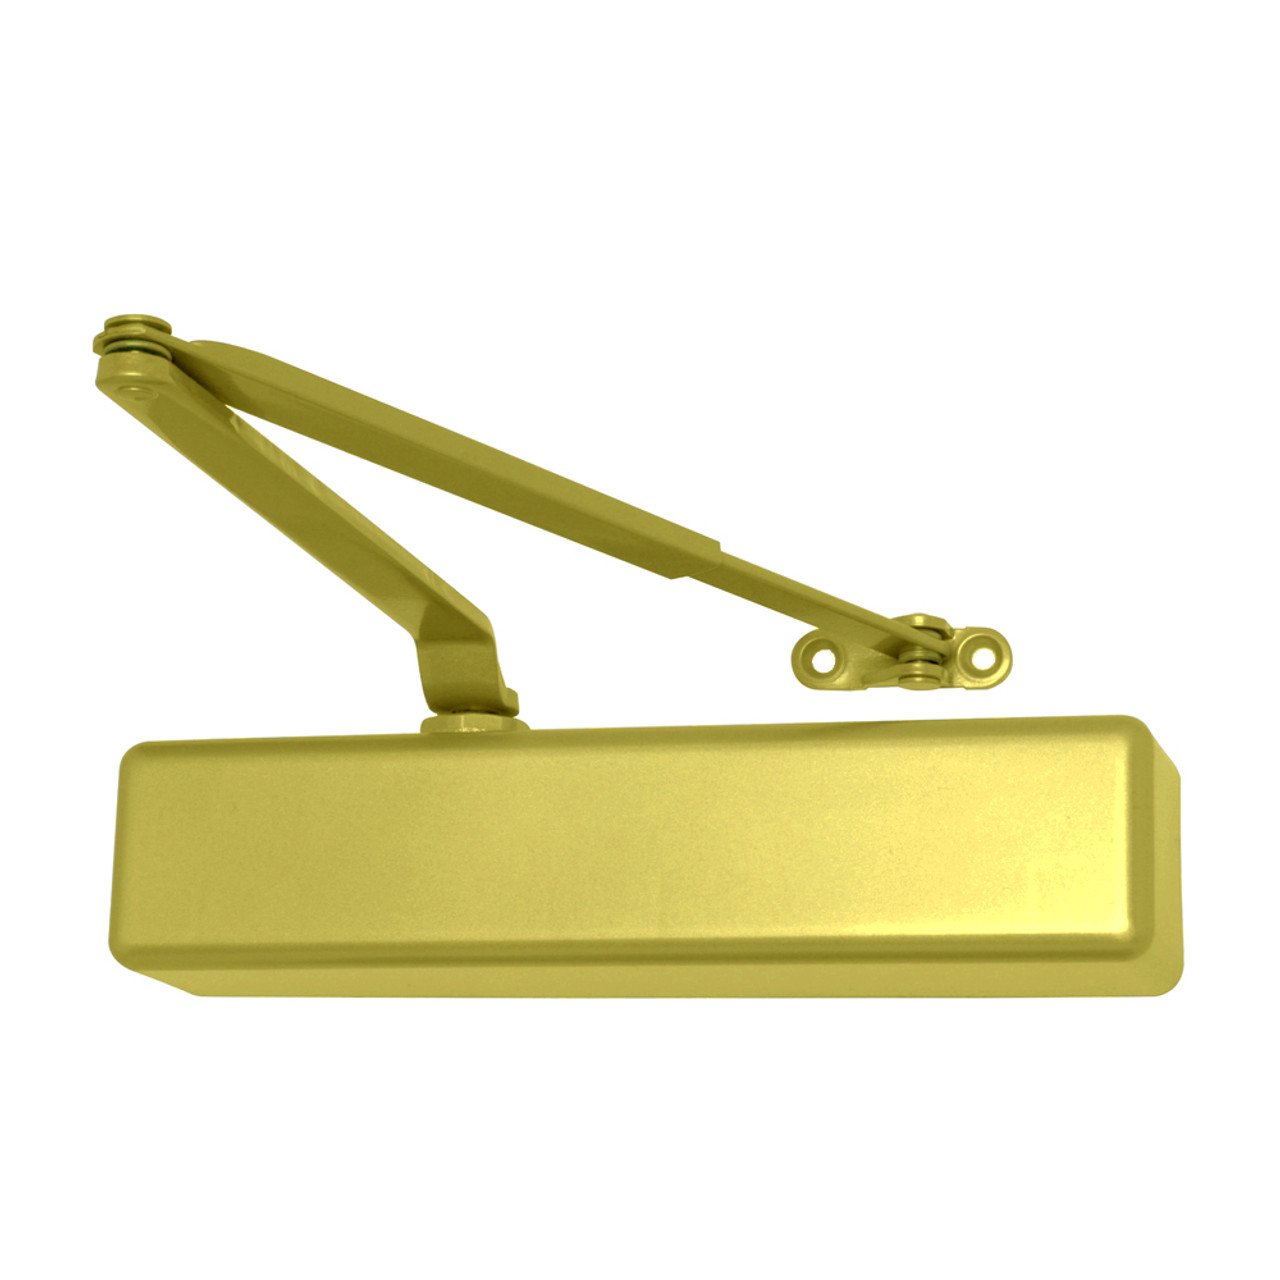 1461-HEDA-w-62G-LH-BRASS LCN Door Closer with Hold Open Extra Duty Arm with Thick Hub Shoe in Brass Finish